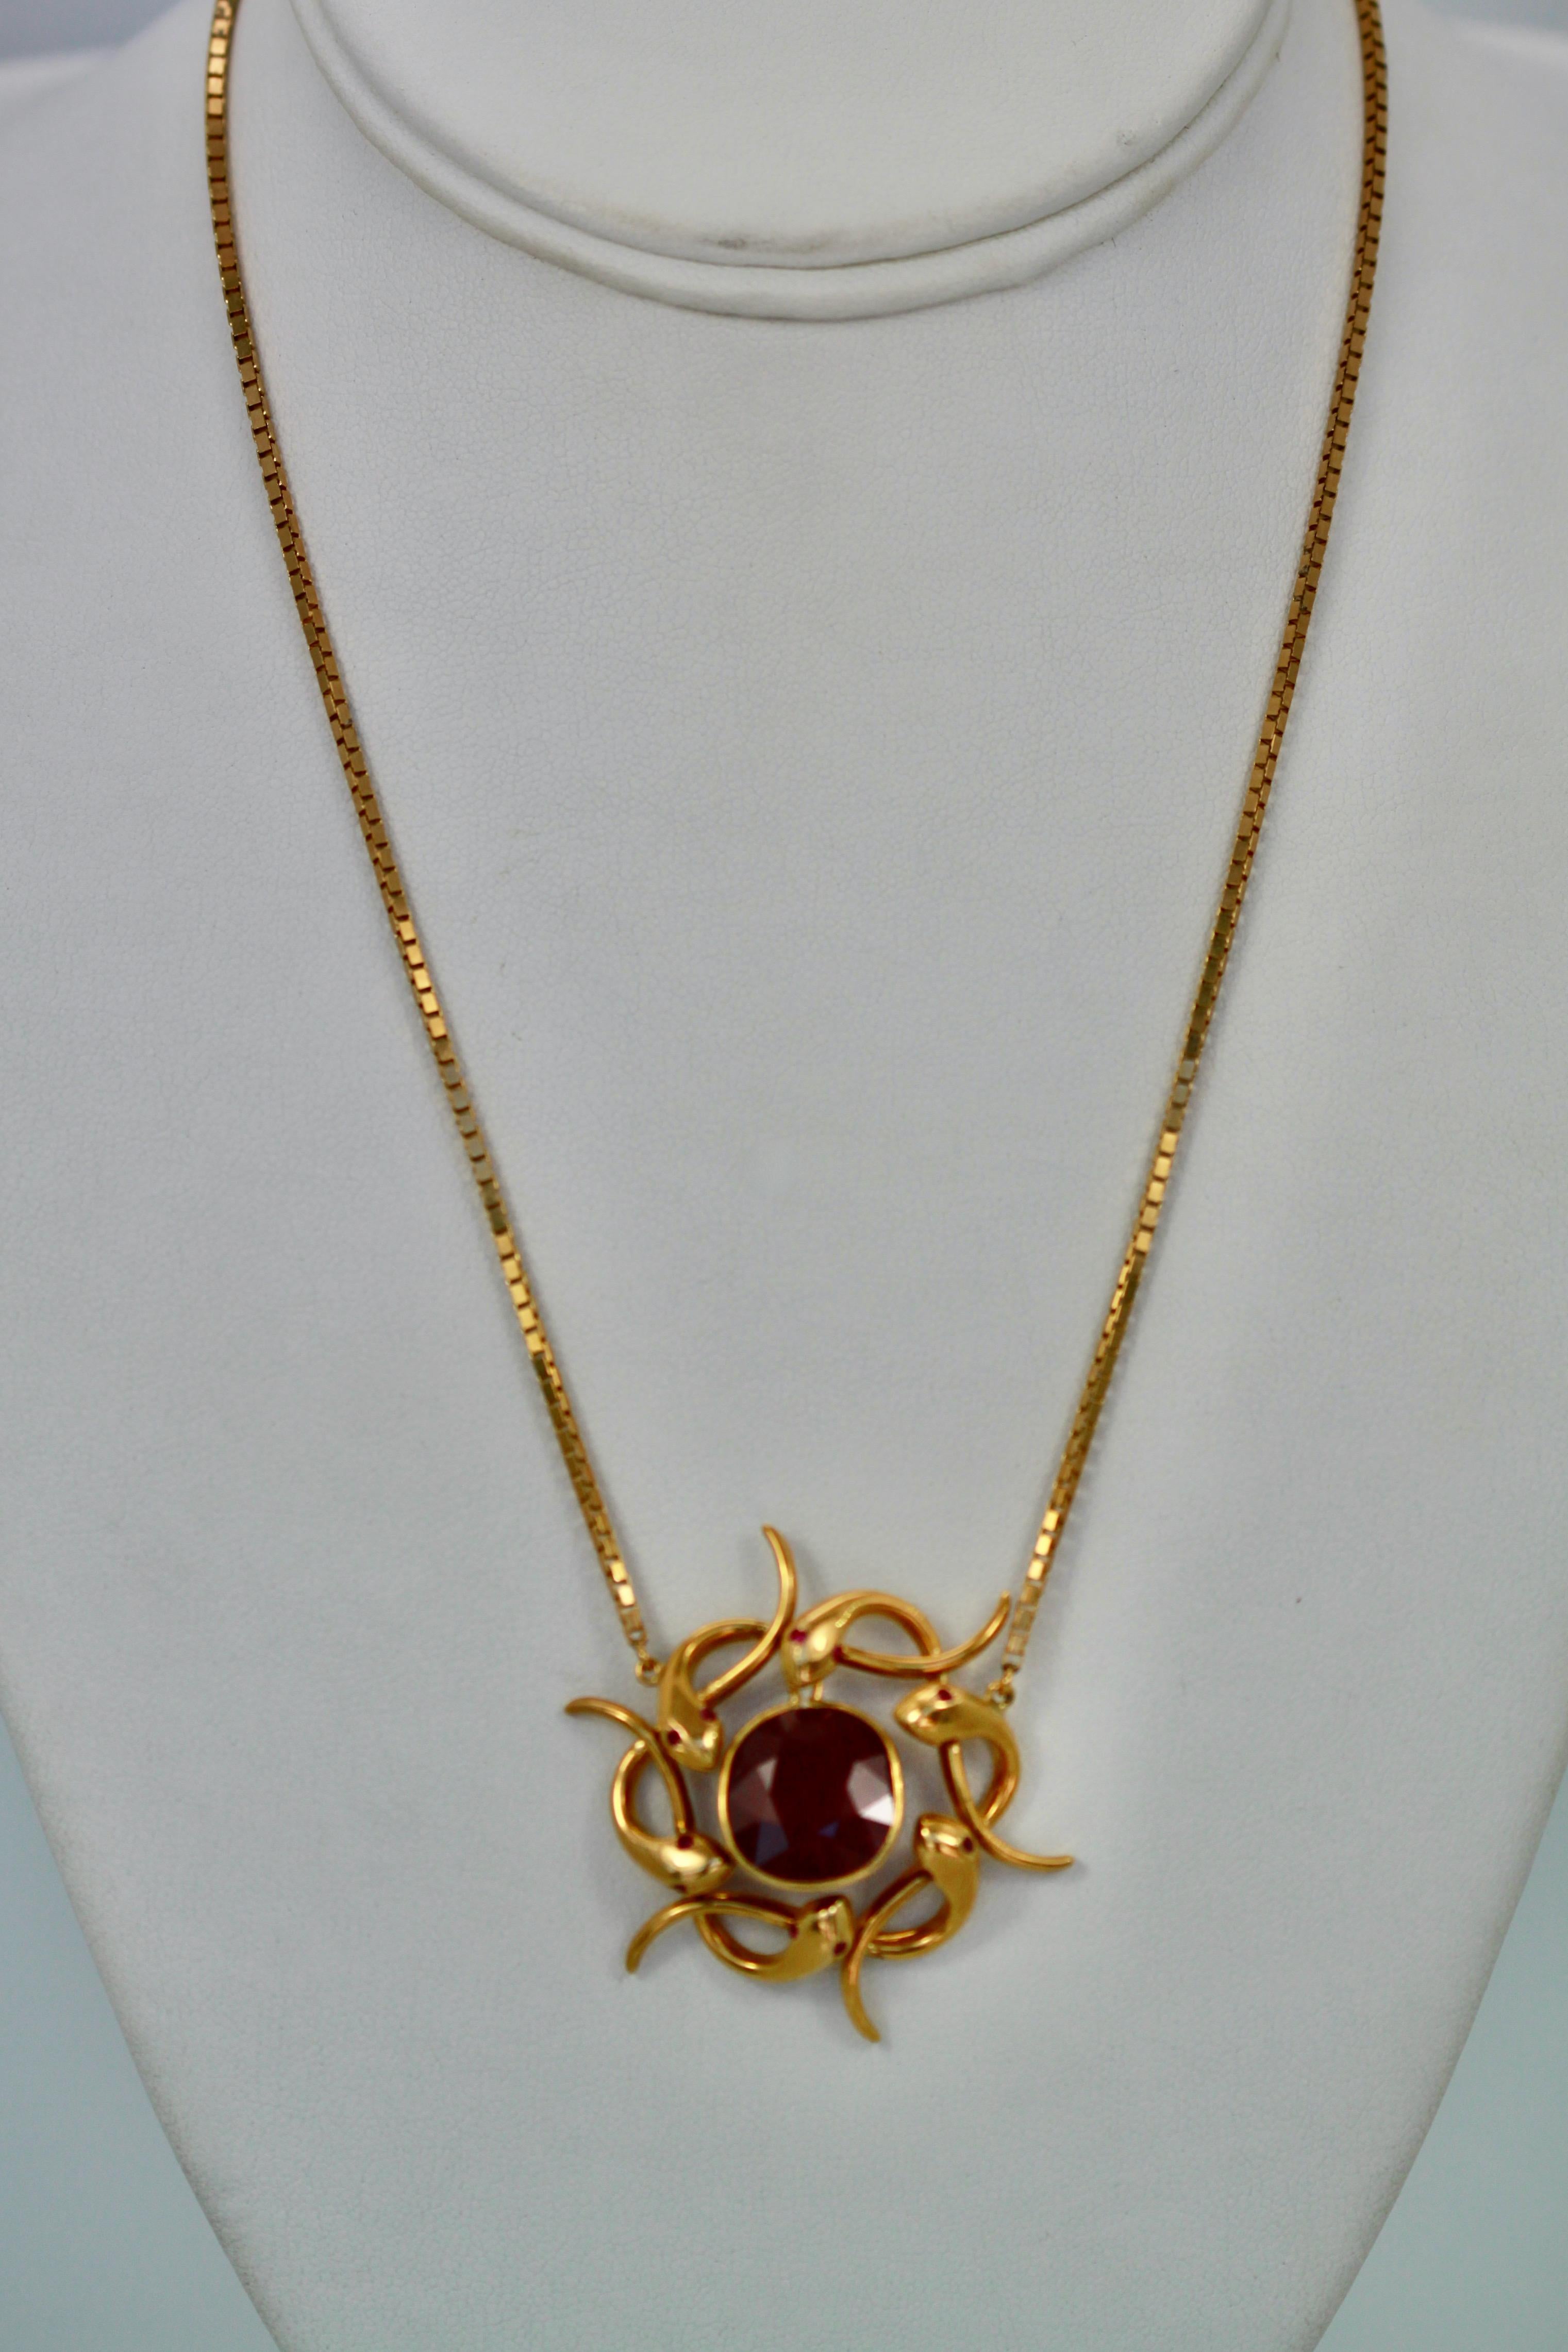 Round Cut Retro Snake Pendant with 9 Carat Ruby in 14k & 22k Gold For Sale